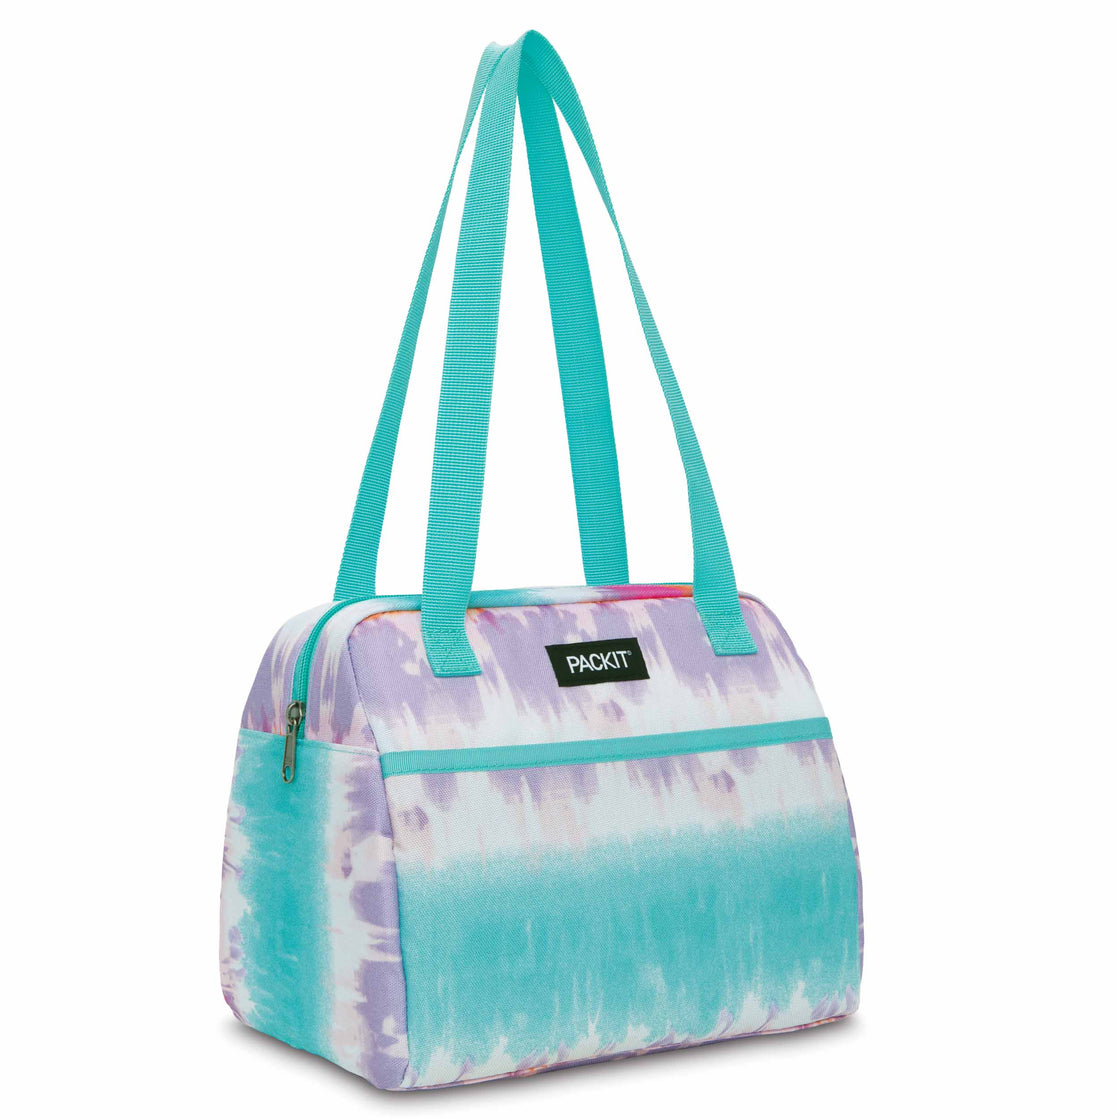 New Fashion leather Shoulder Lady Tote Bag Simple Tie-dye Commuter